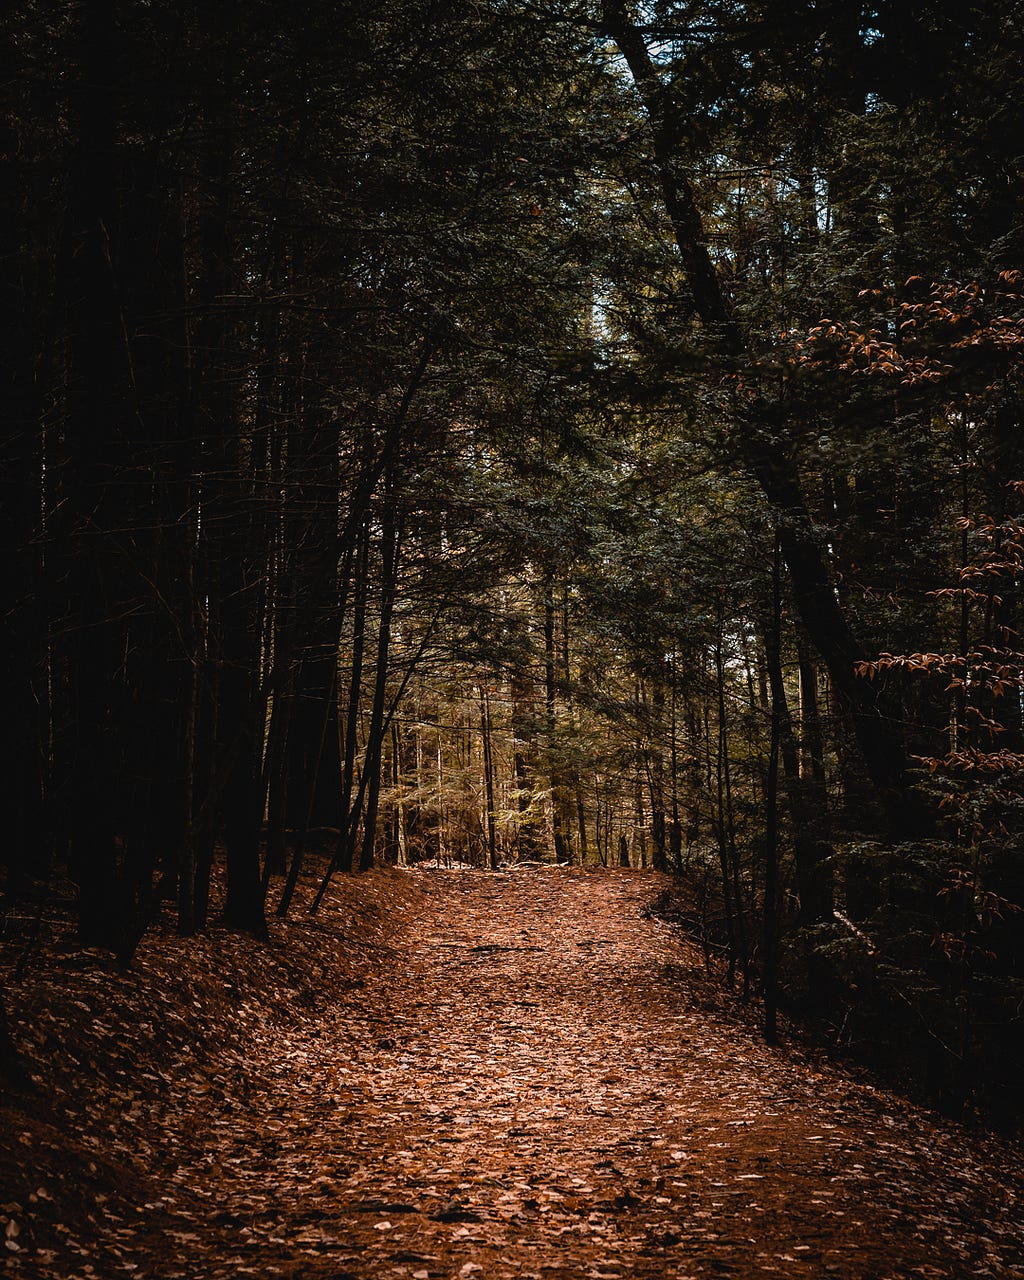 A path in a heavily wooded forest scattered with leaves